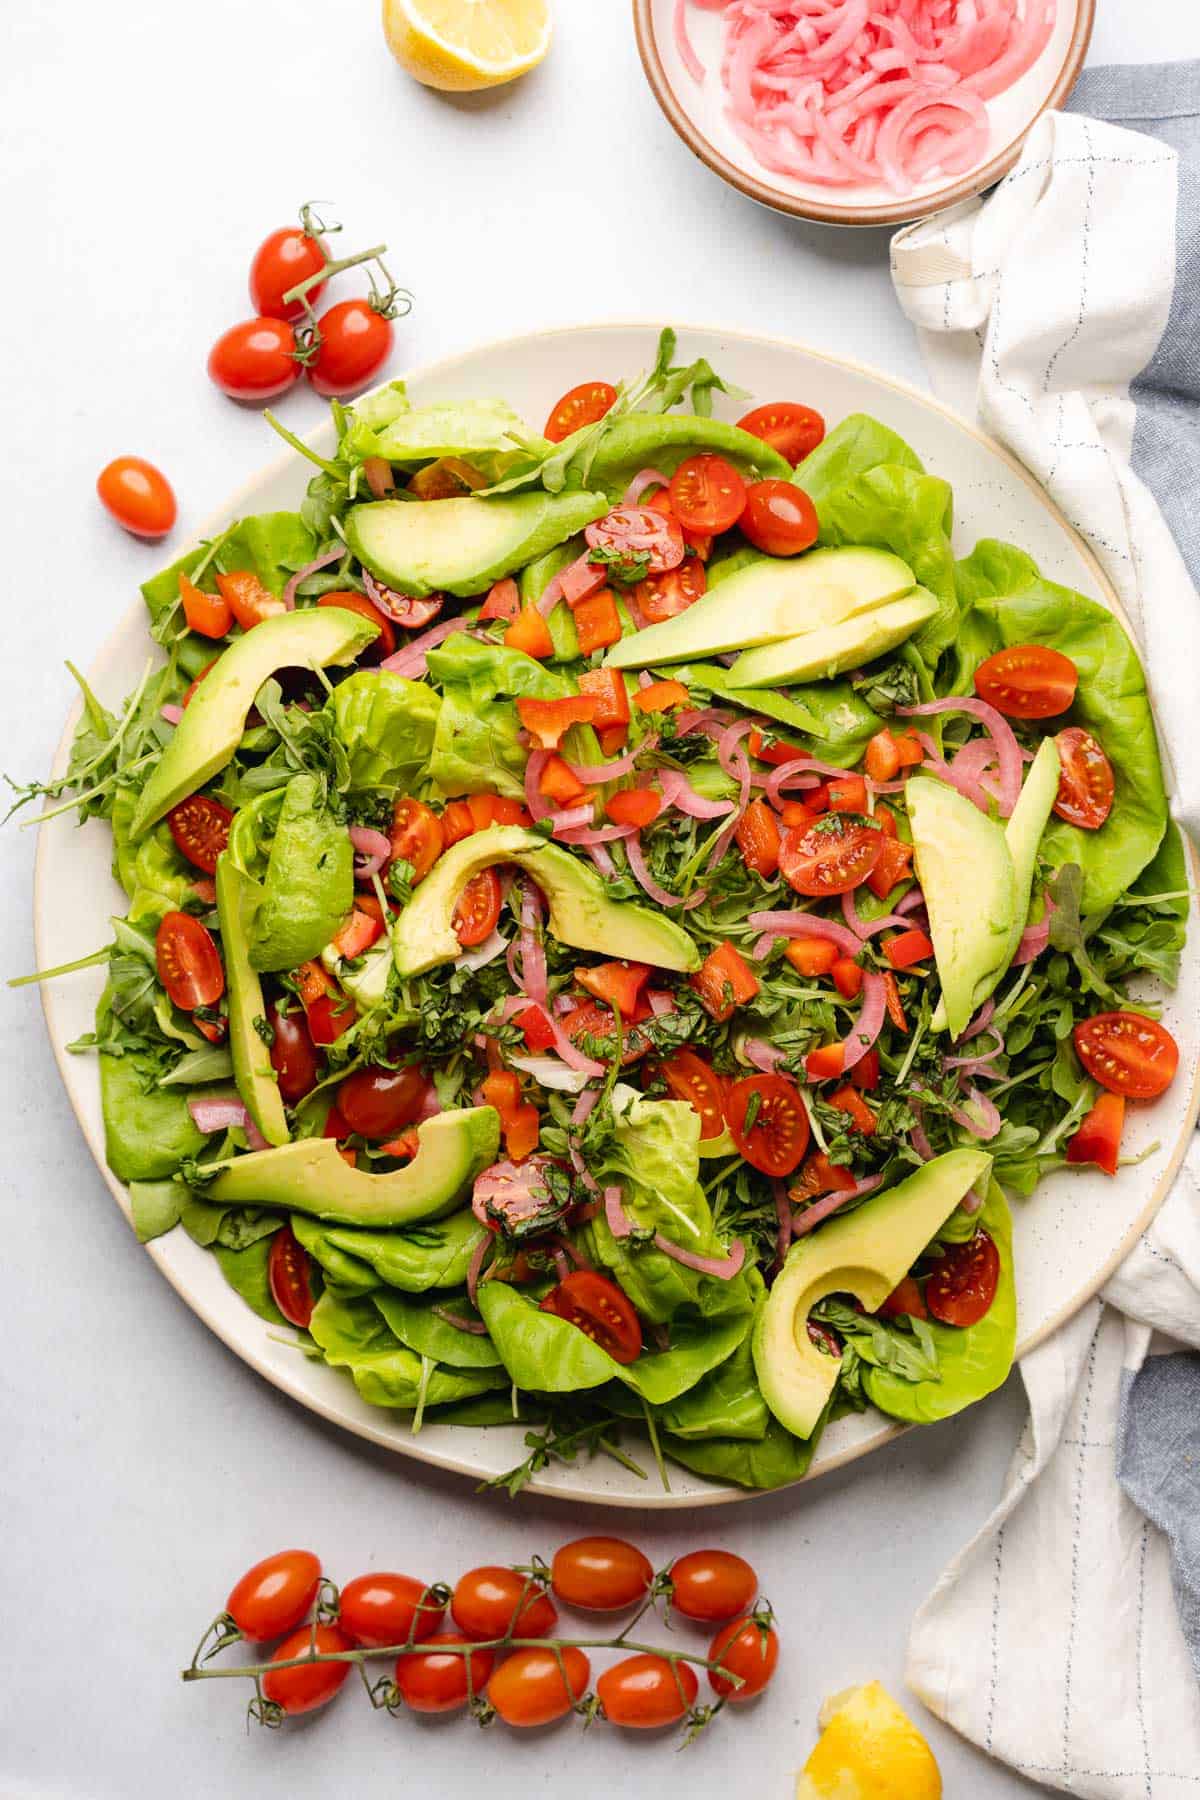 bed of lettuce and arugula with pickled red onions, avocado, red bell peppers and tomatoes on top